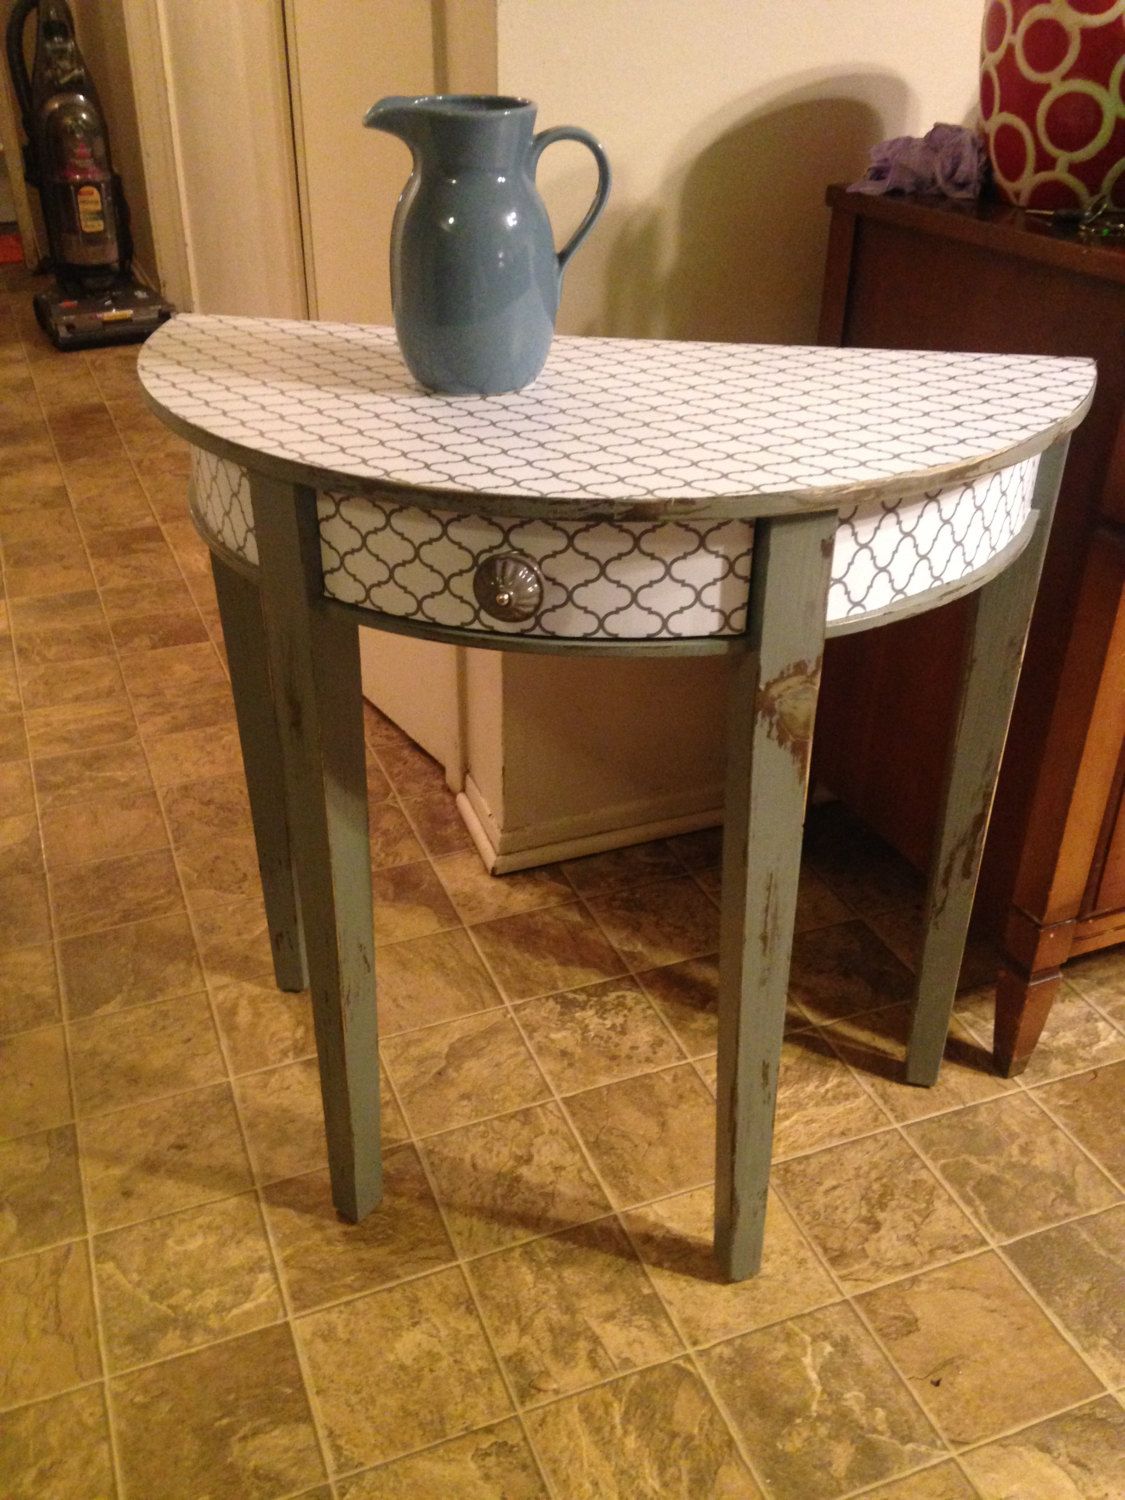 upcycled shabby chic accent table thriftedcharacter etsy console with sliding barn doors round dining pier one bean bag decoration ideas blue outdoor side end storage bin college